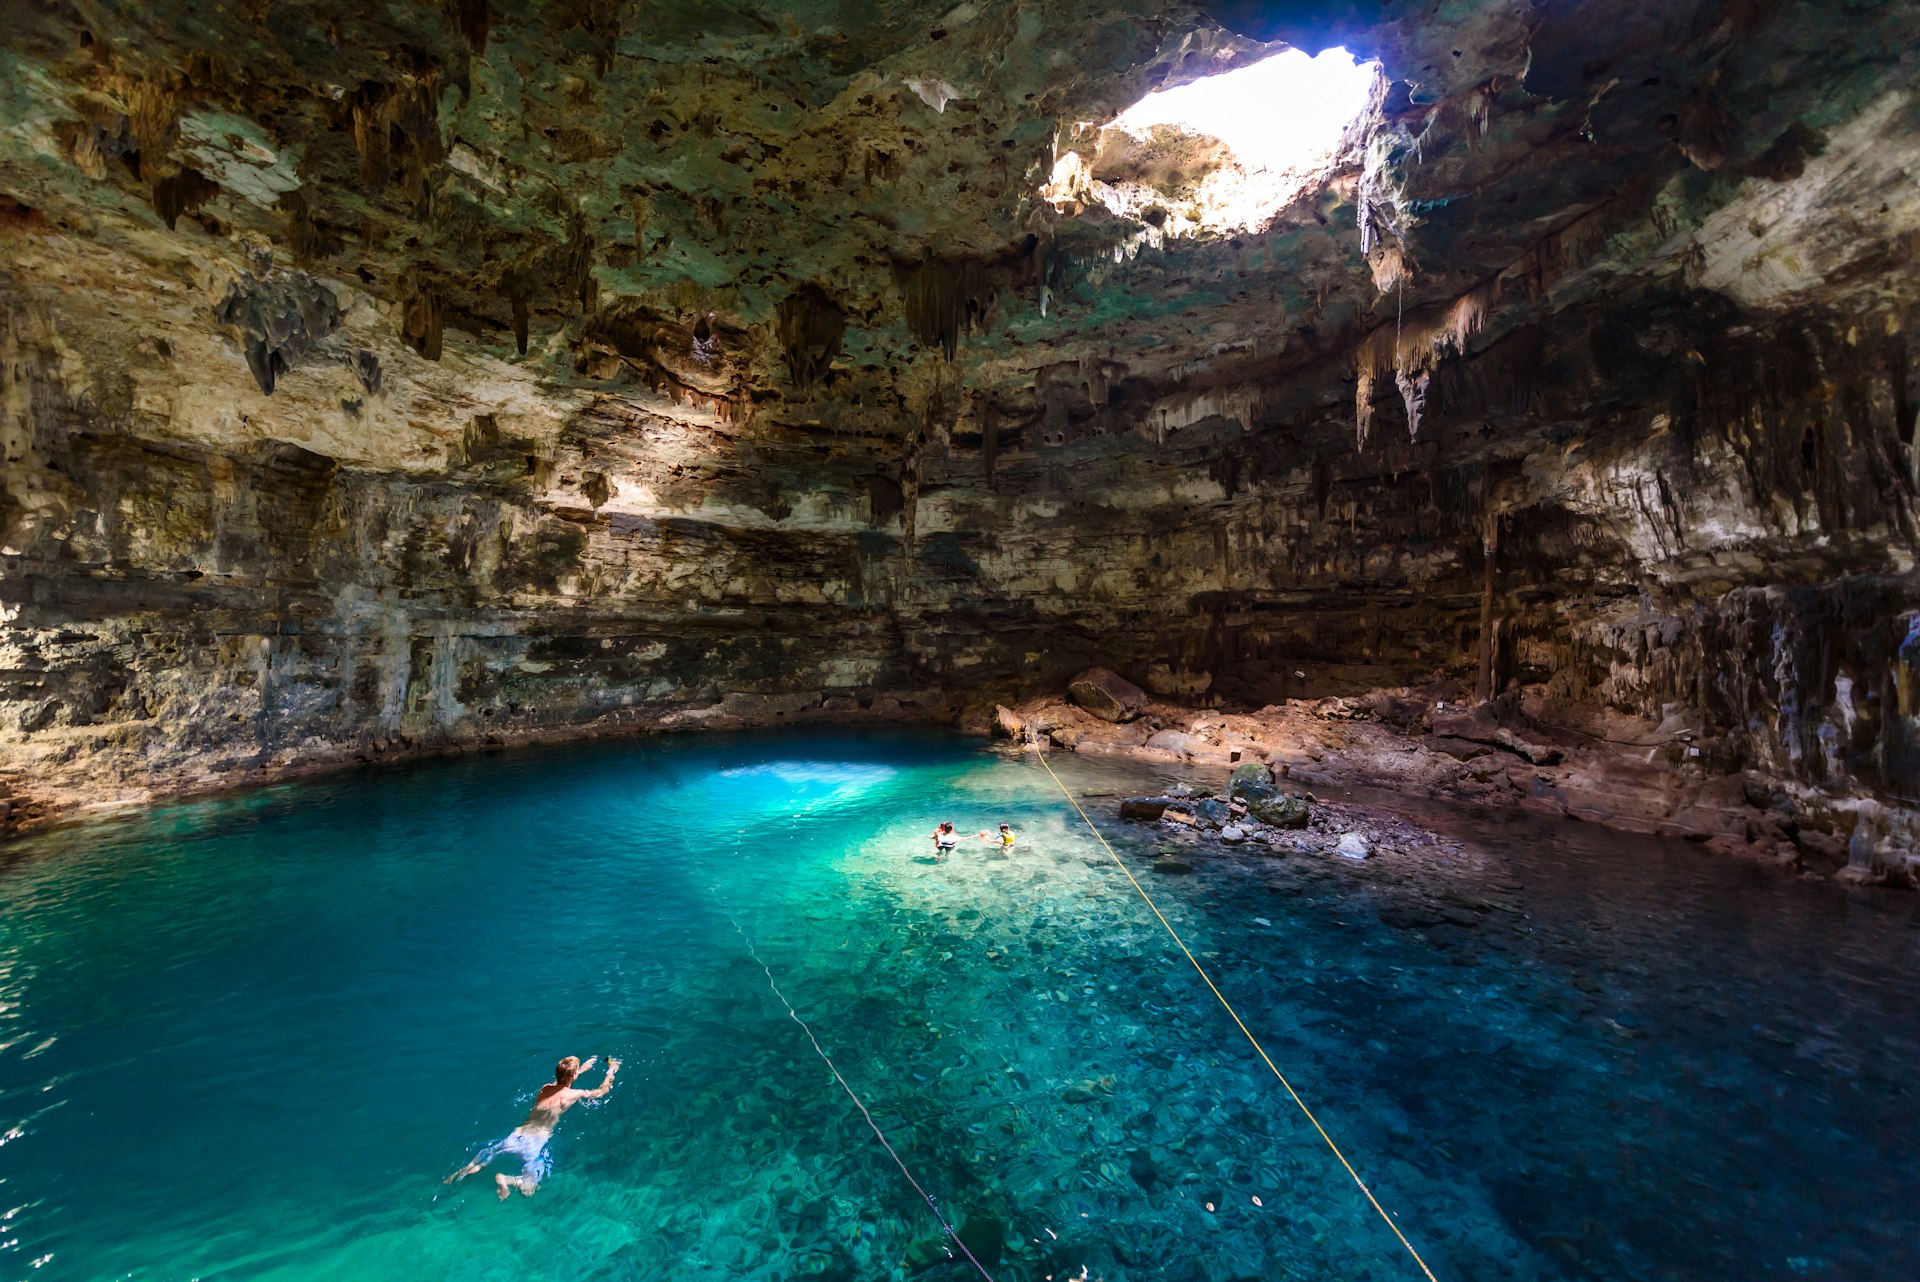 A swimming hole in a cave with a single light source coming from the hole in the cave roof